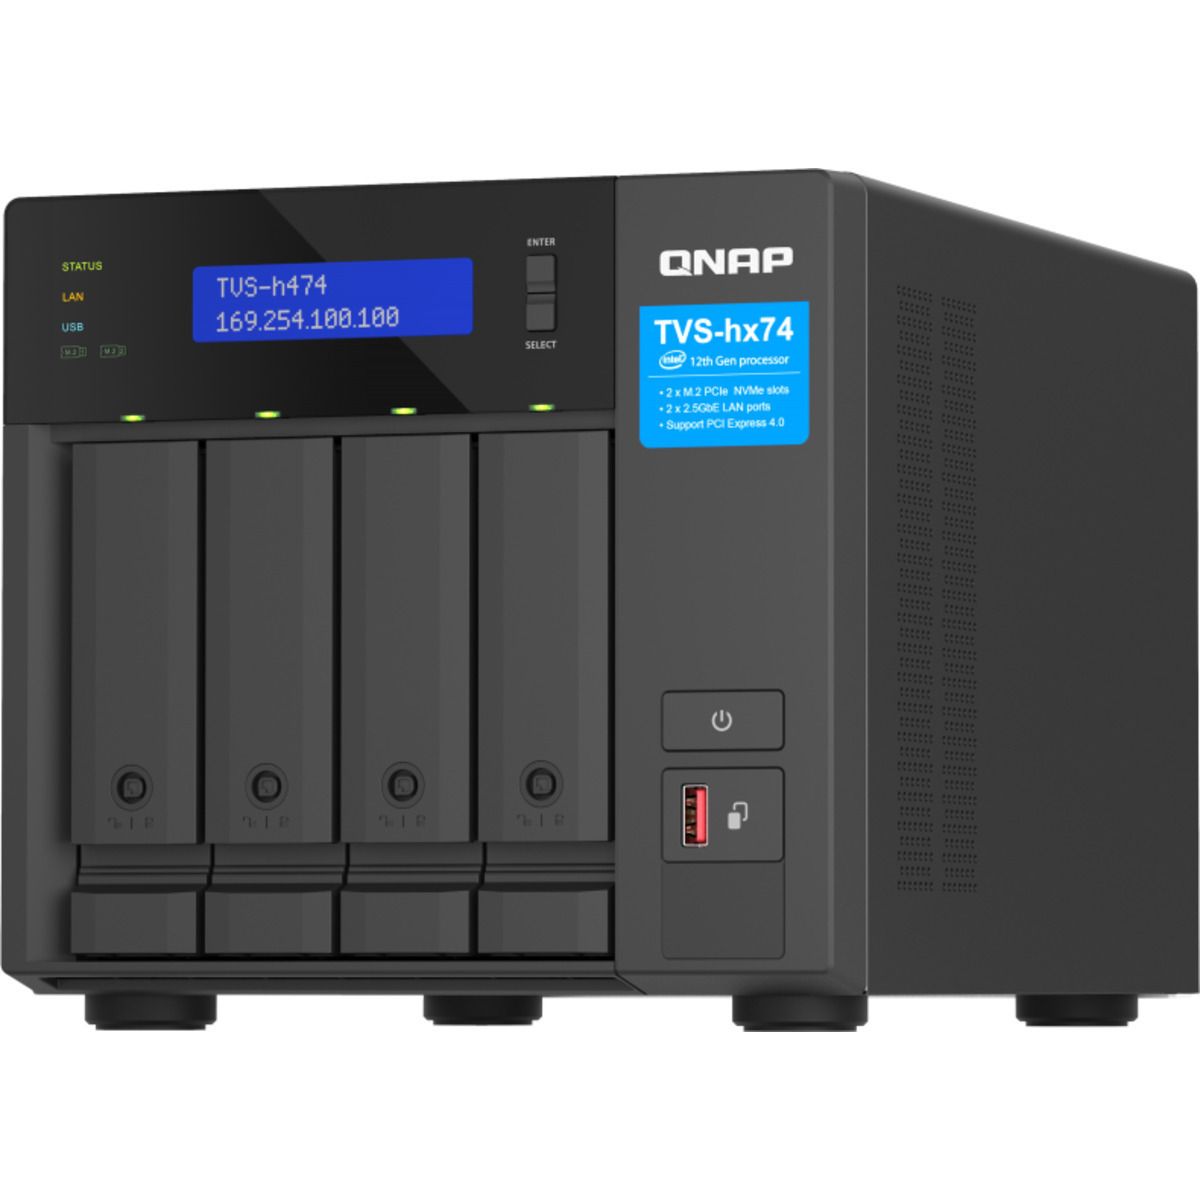 QNAP TVS-h474 Pentium Gold 12tb 4-Bay Desktop Multimedia / Power User / Business NAS - Network Attached Storage Device 2x6tb Seagate BarraCuda ST6000DM003 3.5 5400rpm SATA 6Gb/s HDD CONSUMER Class Drives Installed - Burn-In Tested - FREE RAM UPGRADE TVS-h474 Pentium Gold